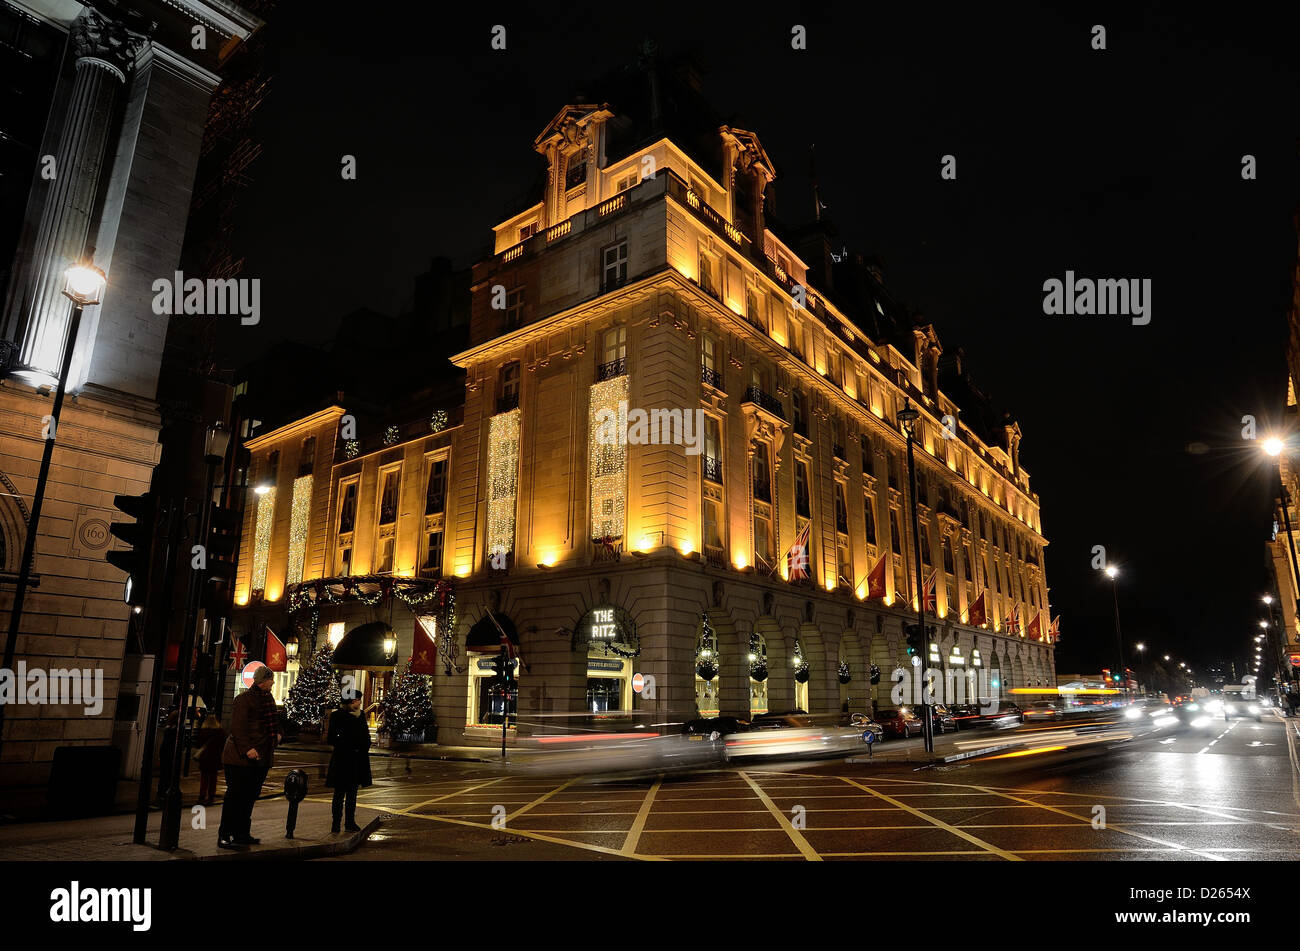 Exterior of The Ritz Hotel Piccadilly at night Stock Photo